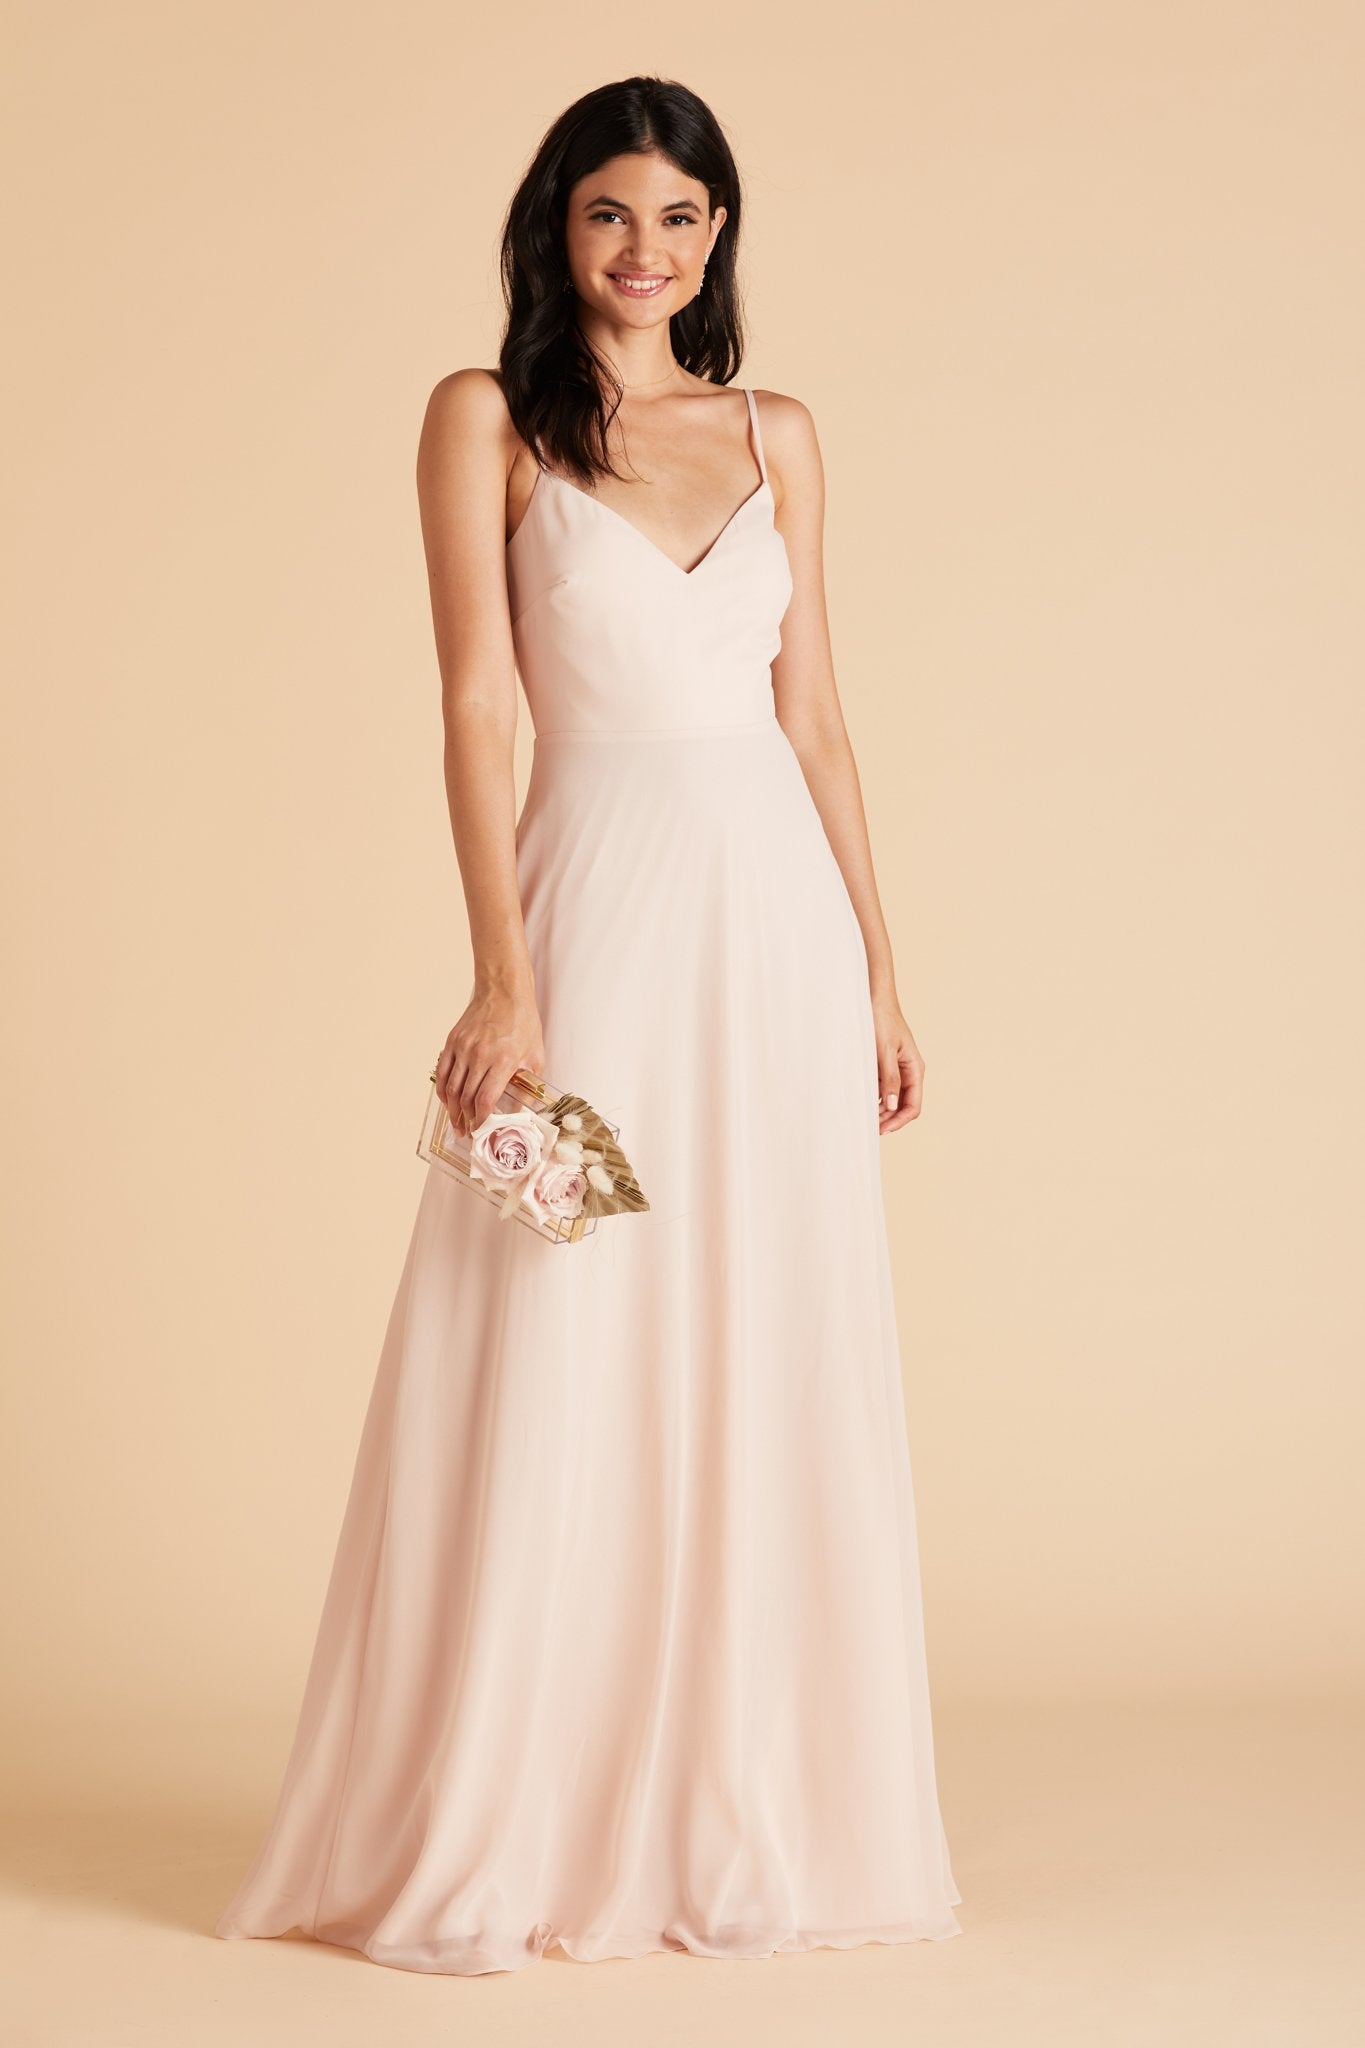 Devin convertible bridesmaids dress in pale blush chiffon by Birdy Grey, front view